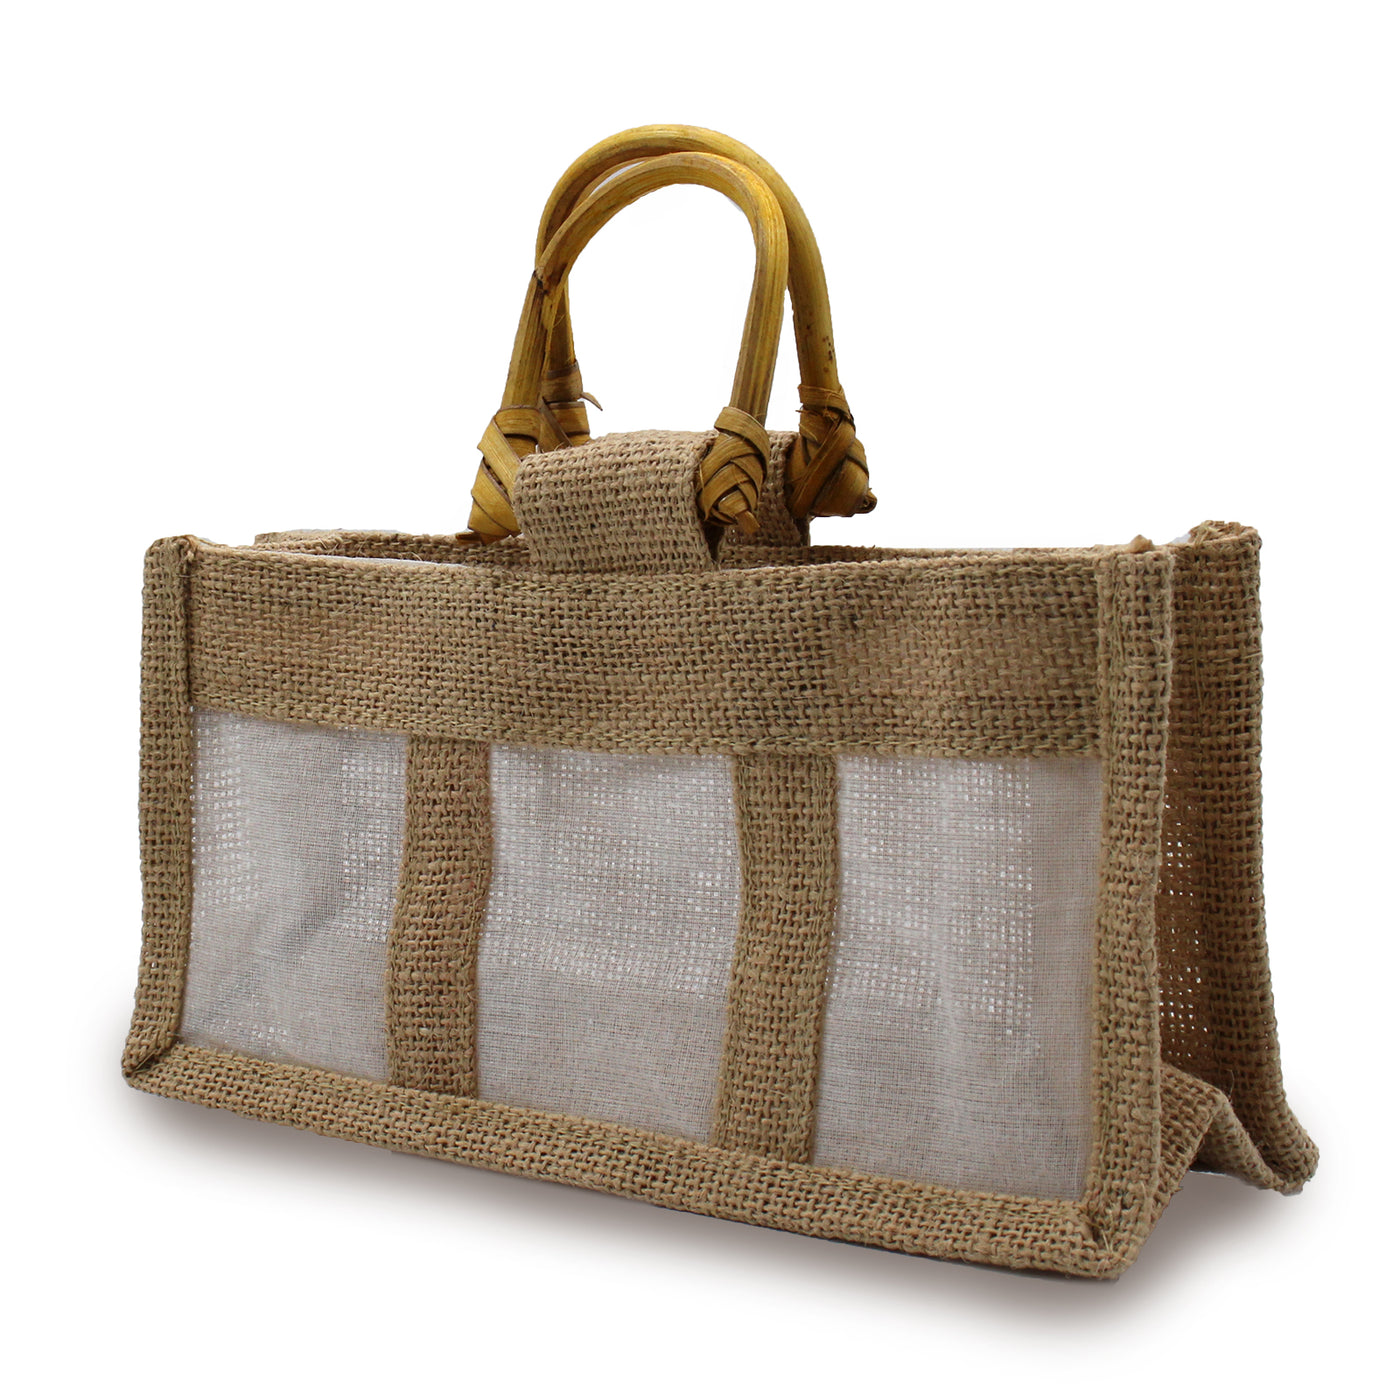 Natural Jute Triple Gift Bag With Clear Window And Handle.